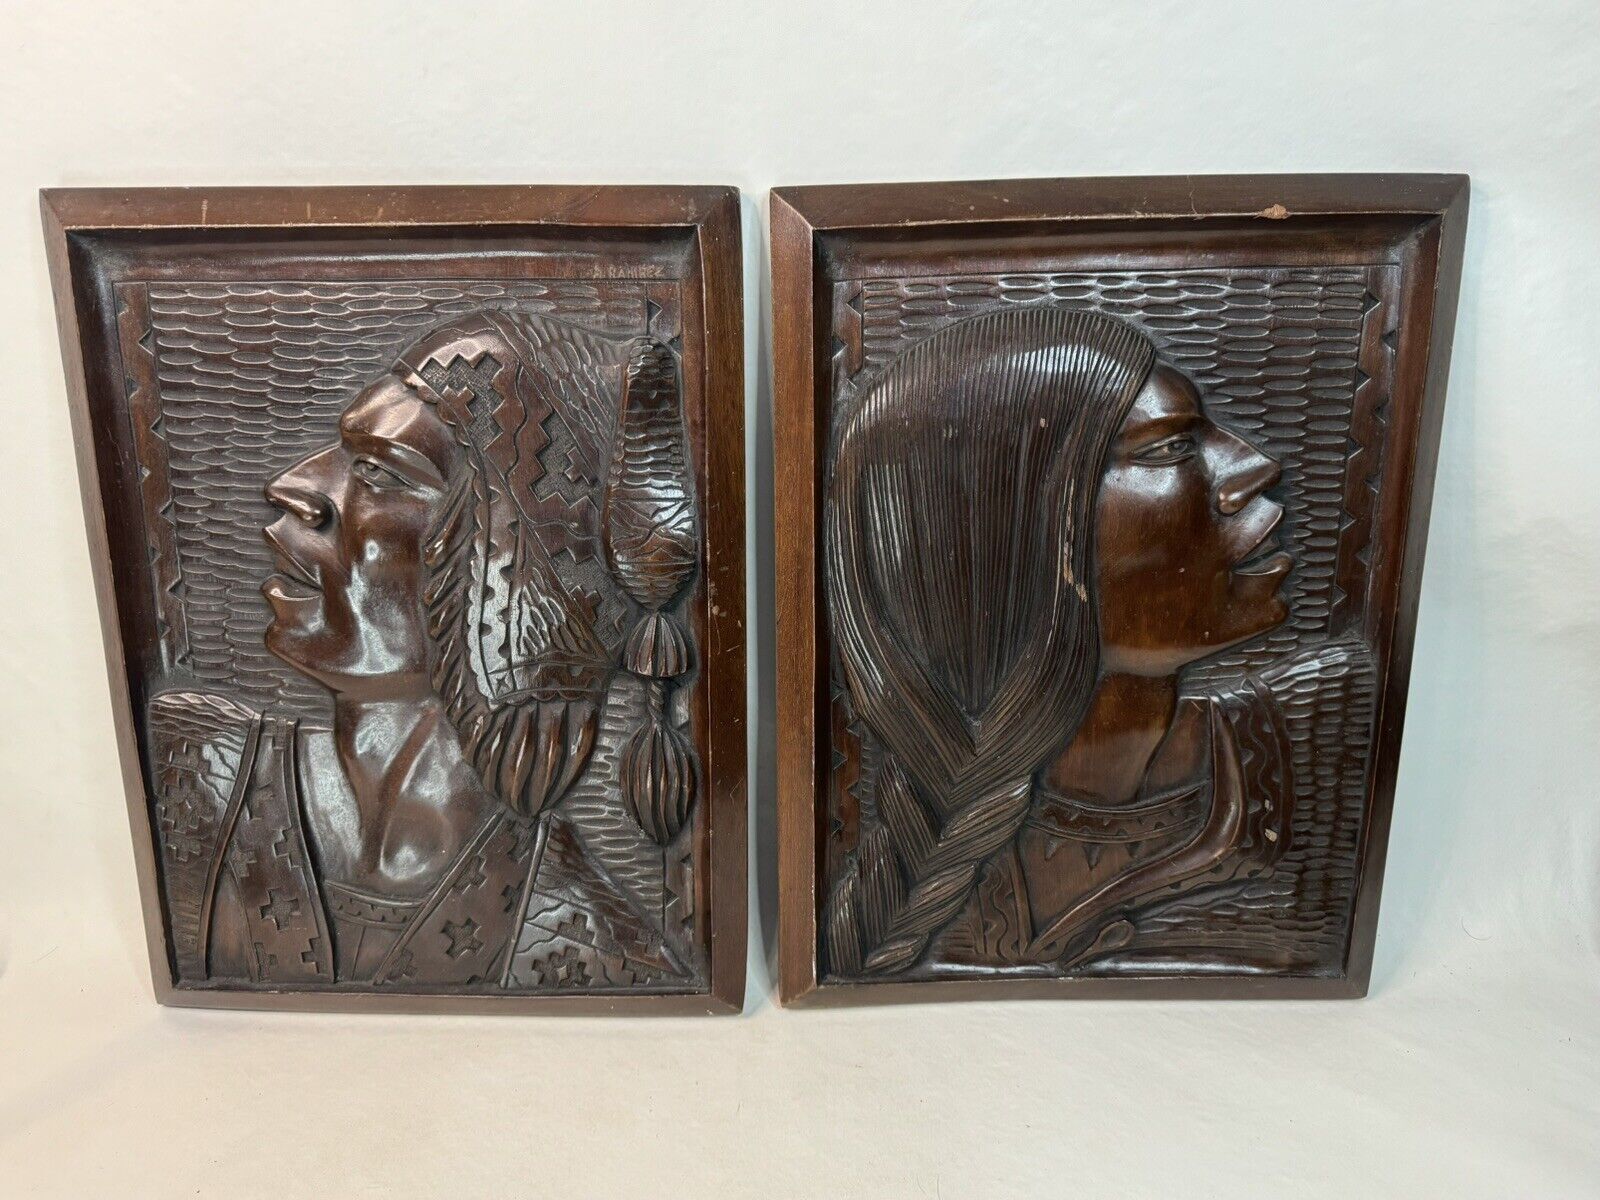 2 RAMIREZ Hand Carved signed Wood Wall Plaques Art